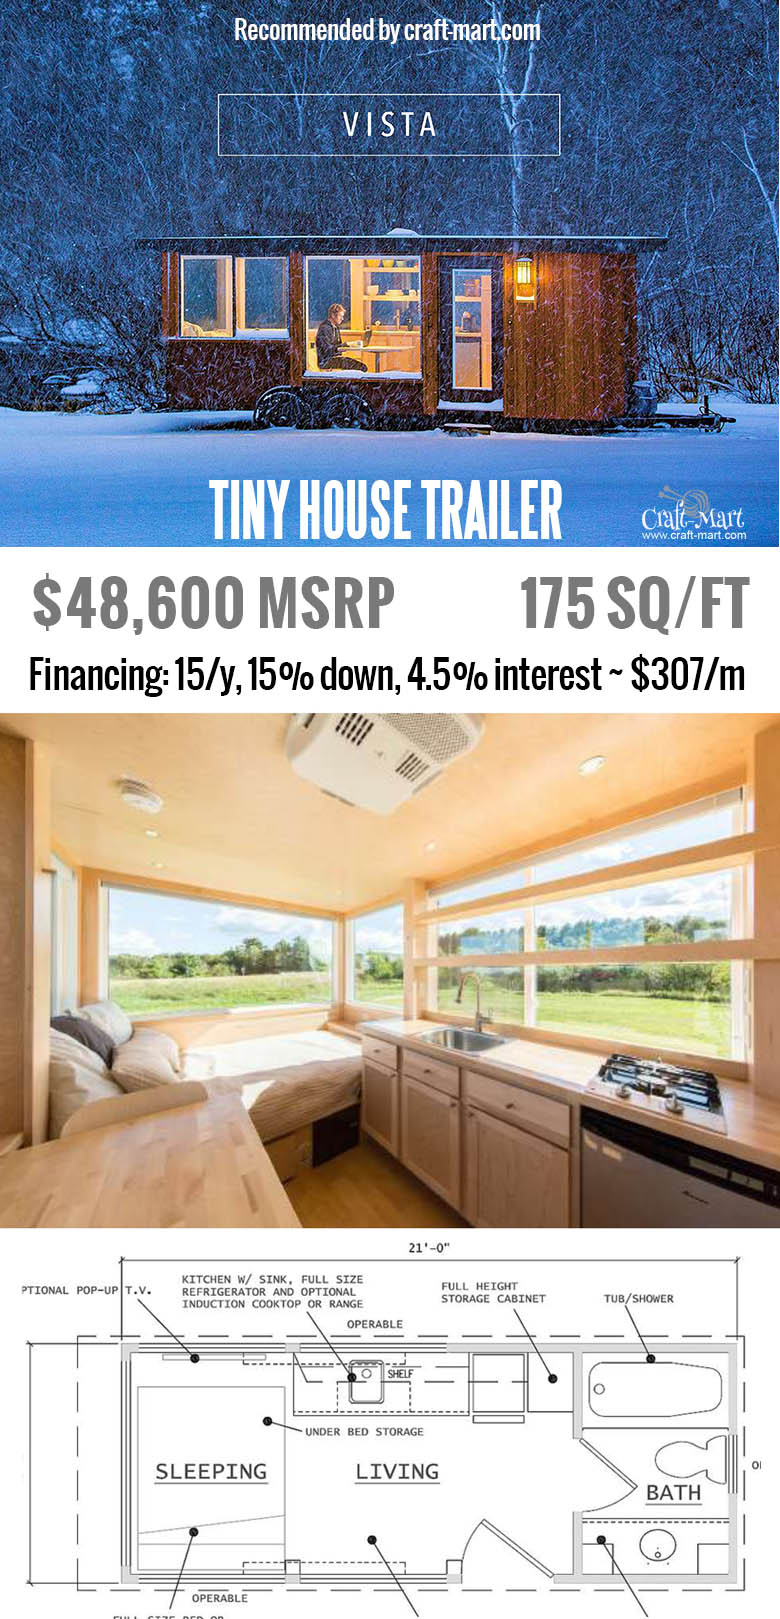 Vista is perfect for a guest house - tiny house trailer interior and plan